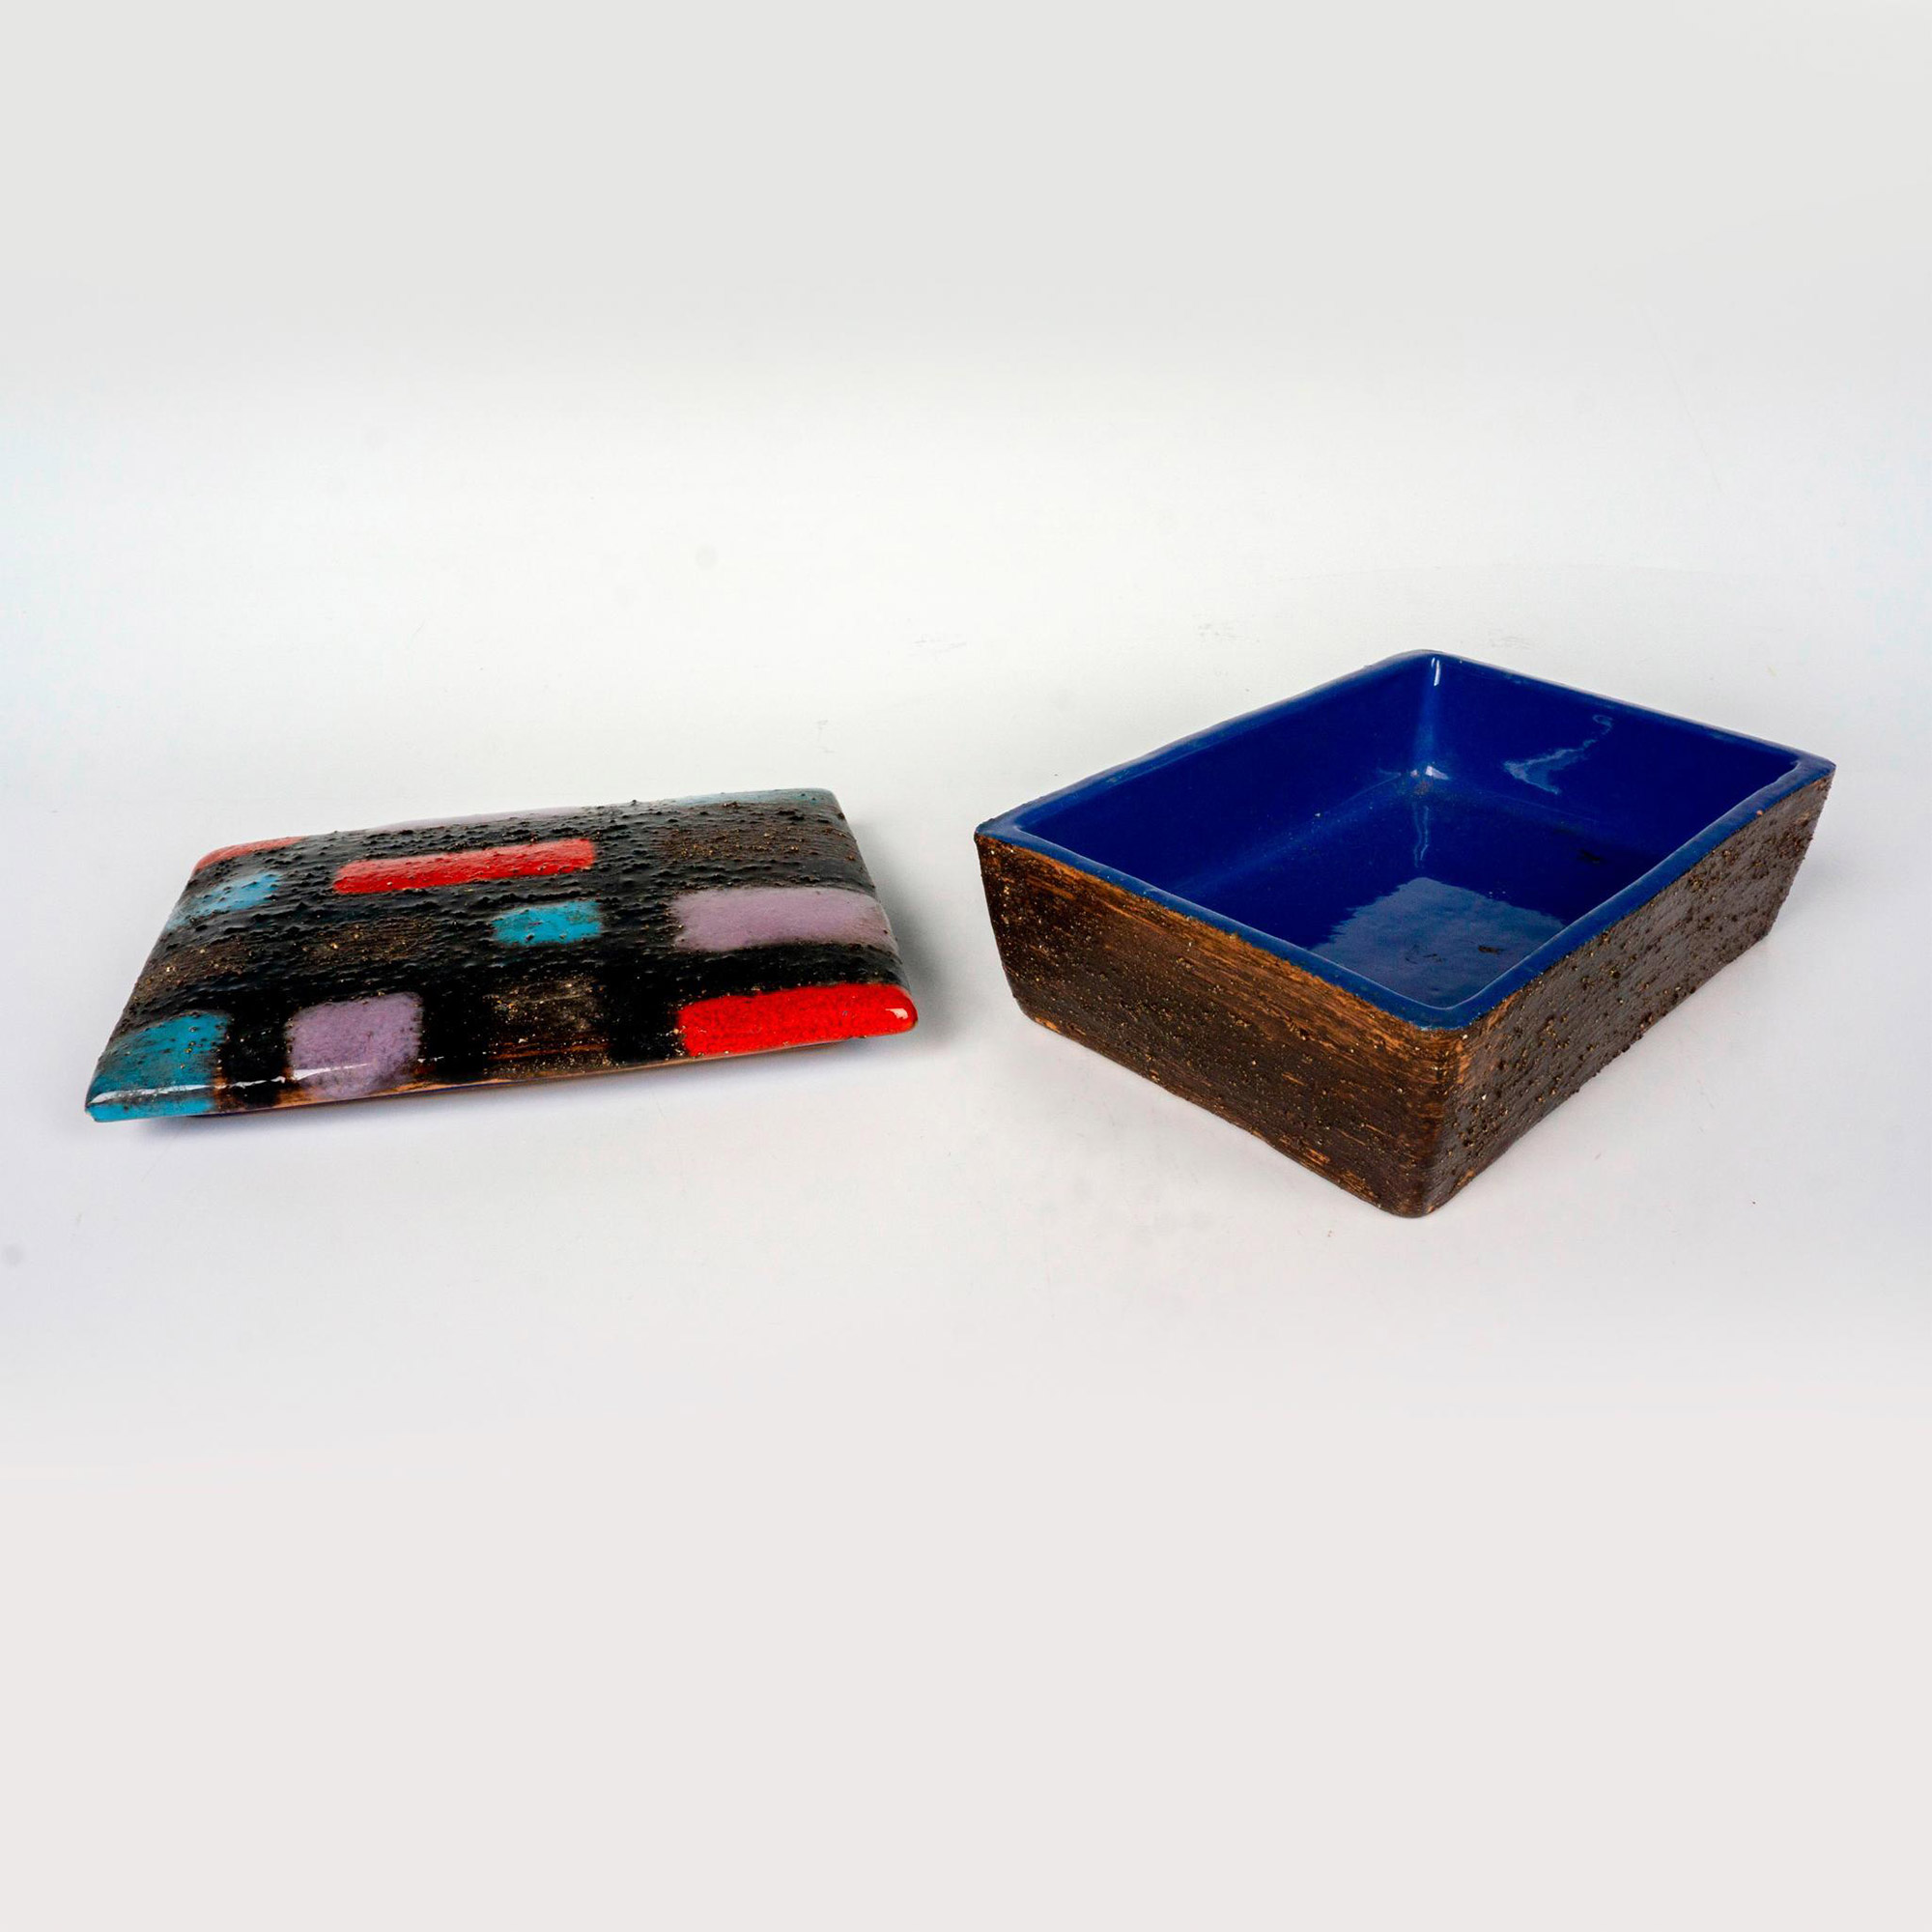 Vintage Italian Pottery Box with Lid - Image 2 of 3